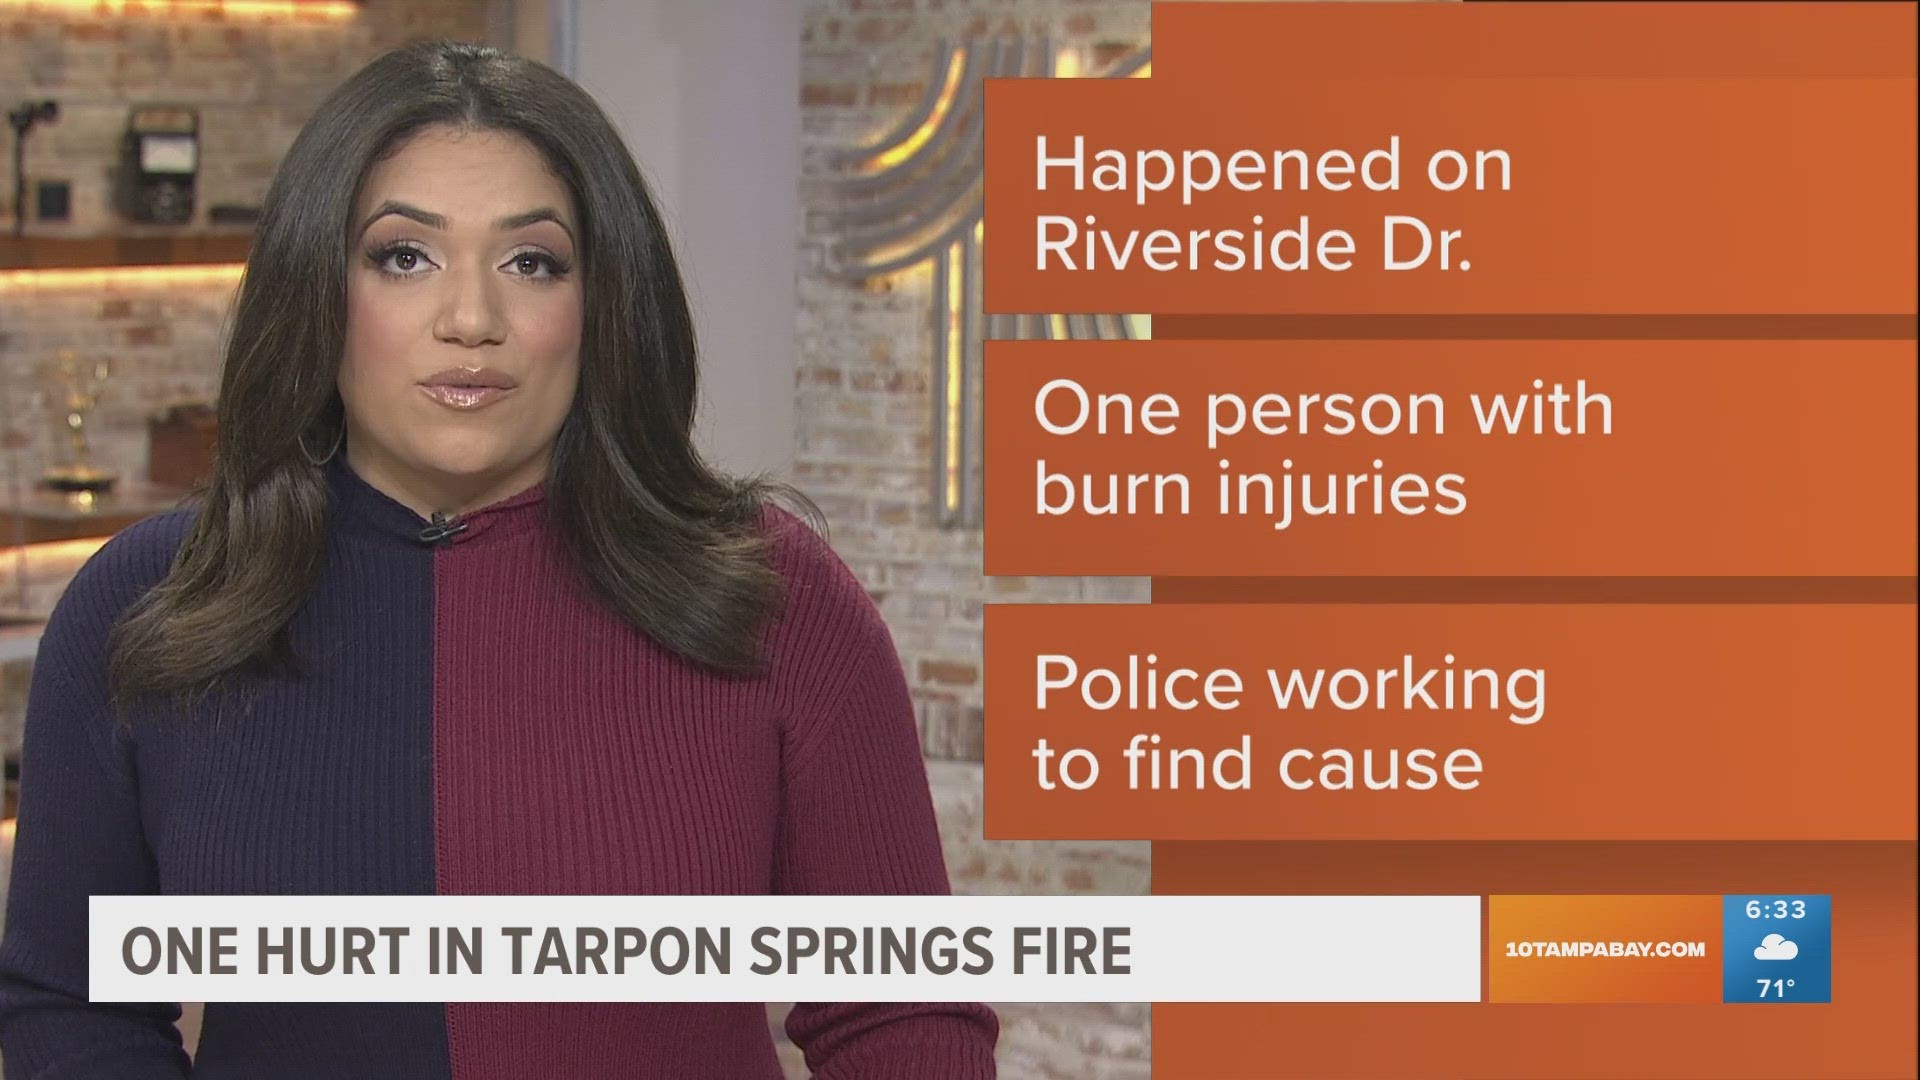 Police in Tarpon Springs are trying to determine the cause of a fire that left one person injured on Riverside Drive.